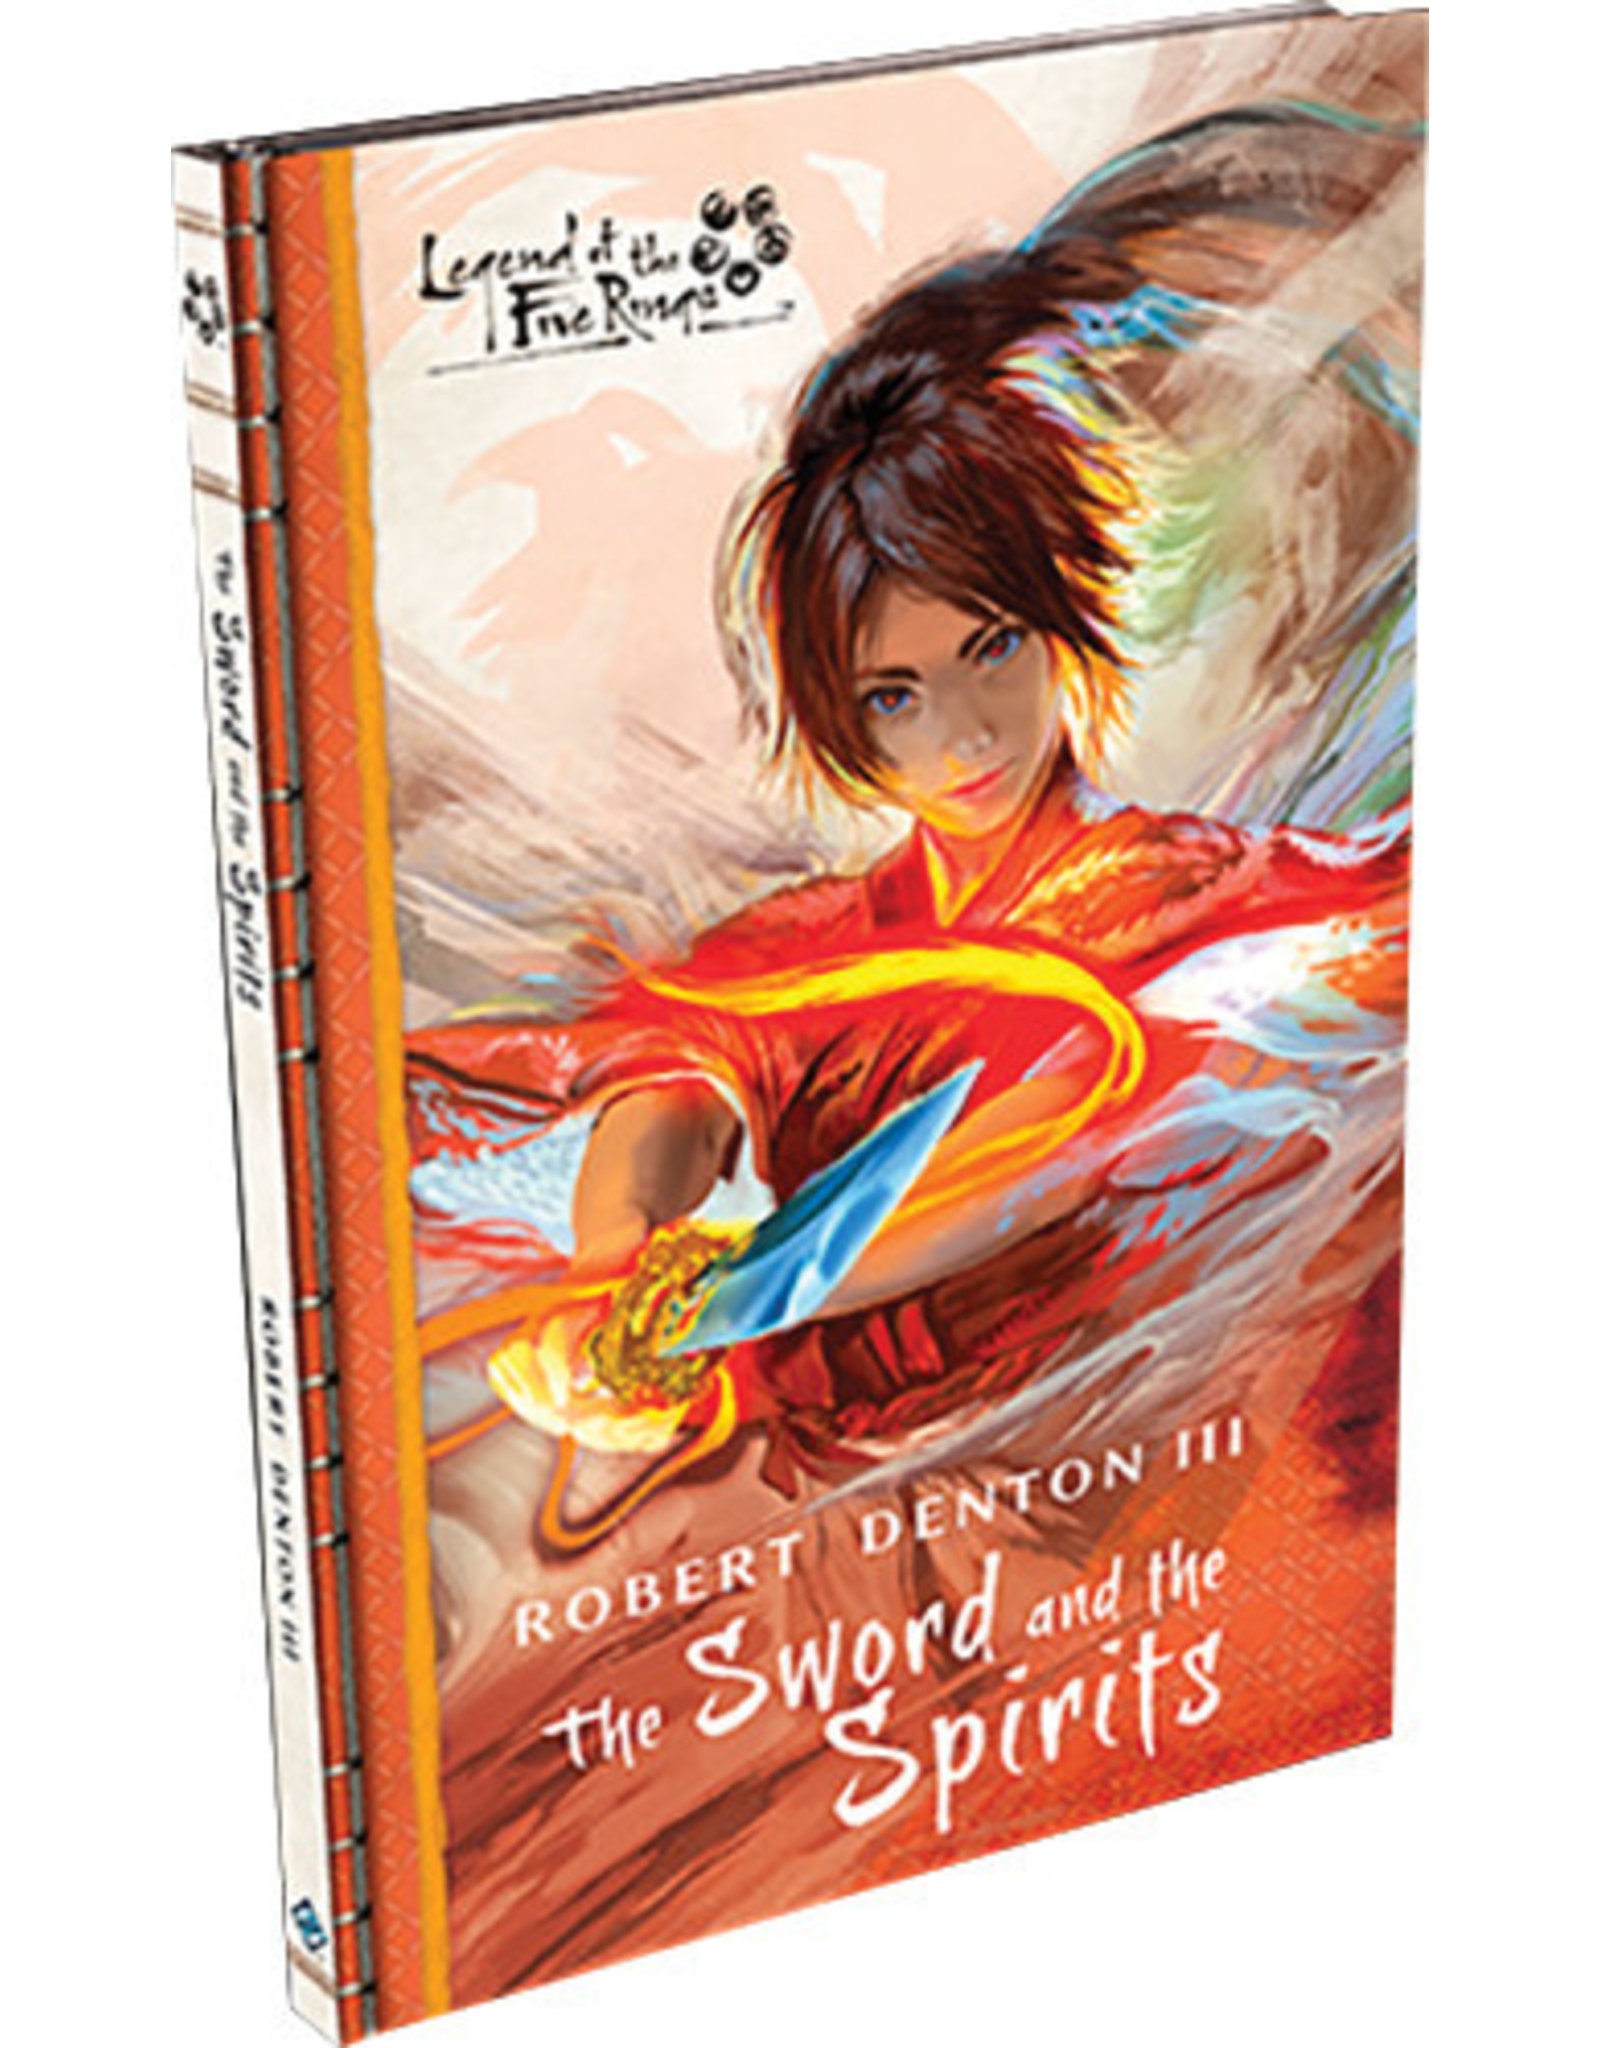 L5R L5R Sword and the Spirits Hardcover